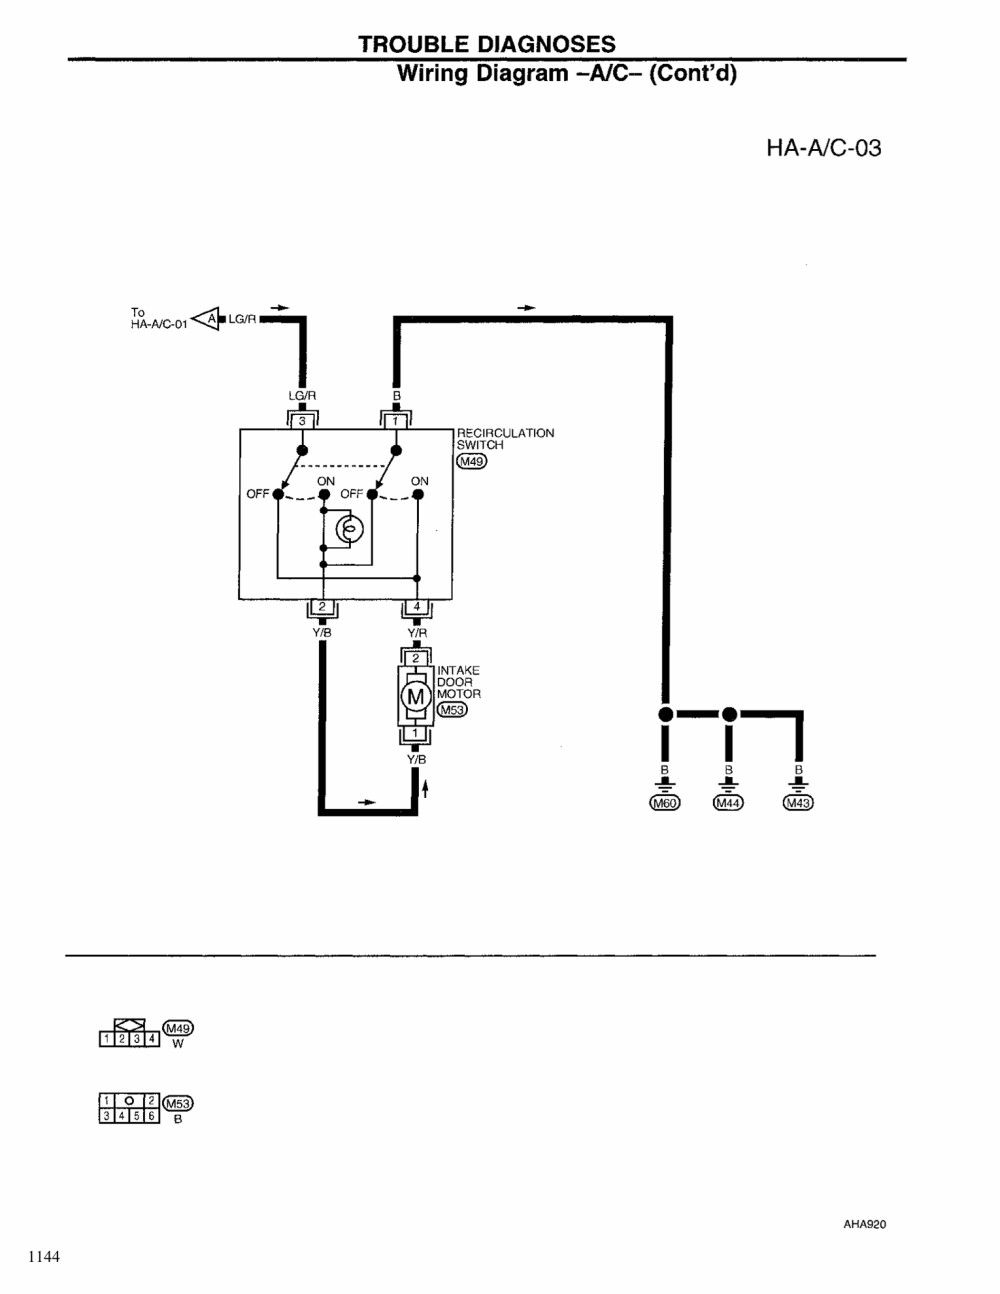 Wiring Diagram A C Page 03 1998